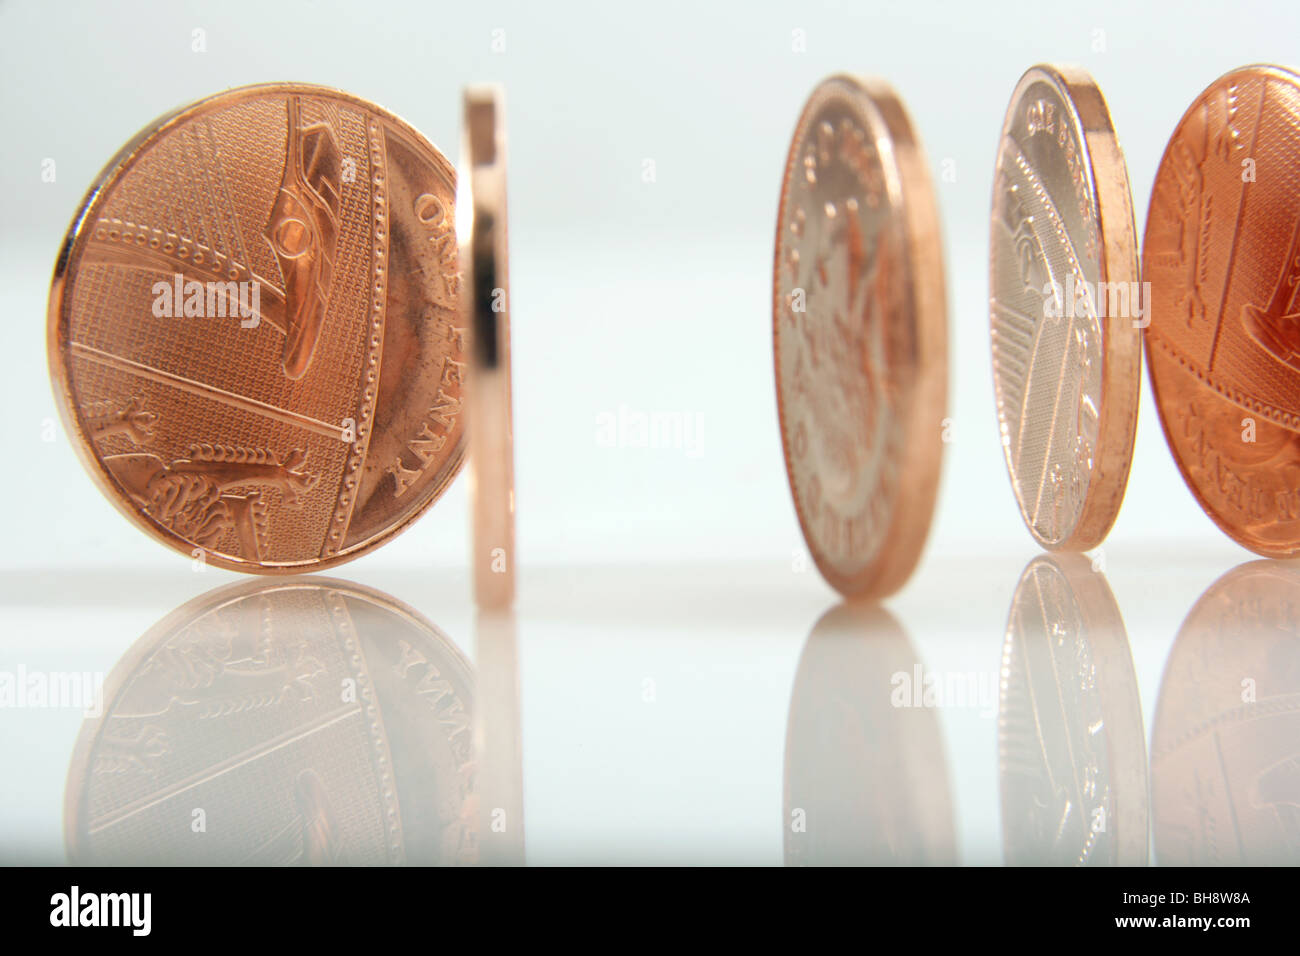 British penny coins standing on their edges on a white background. Stock Photo